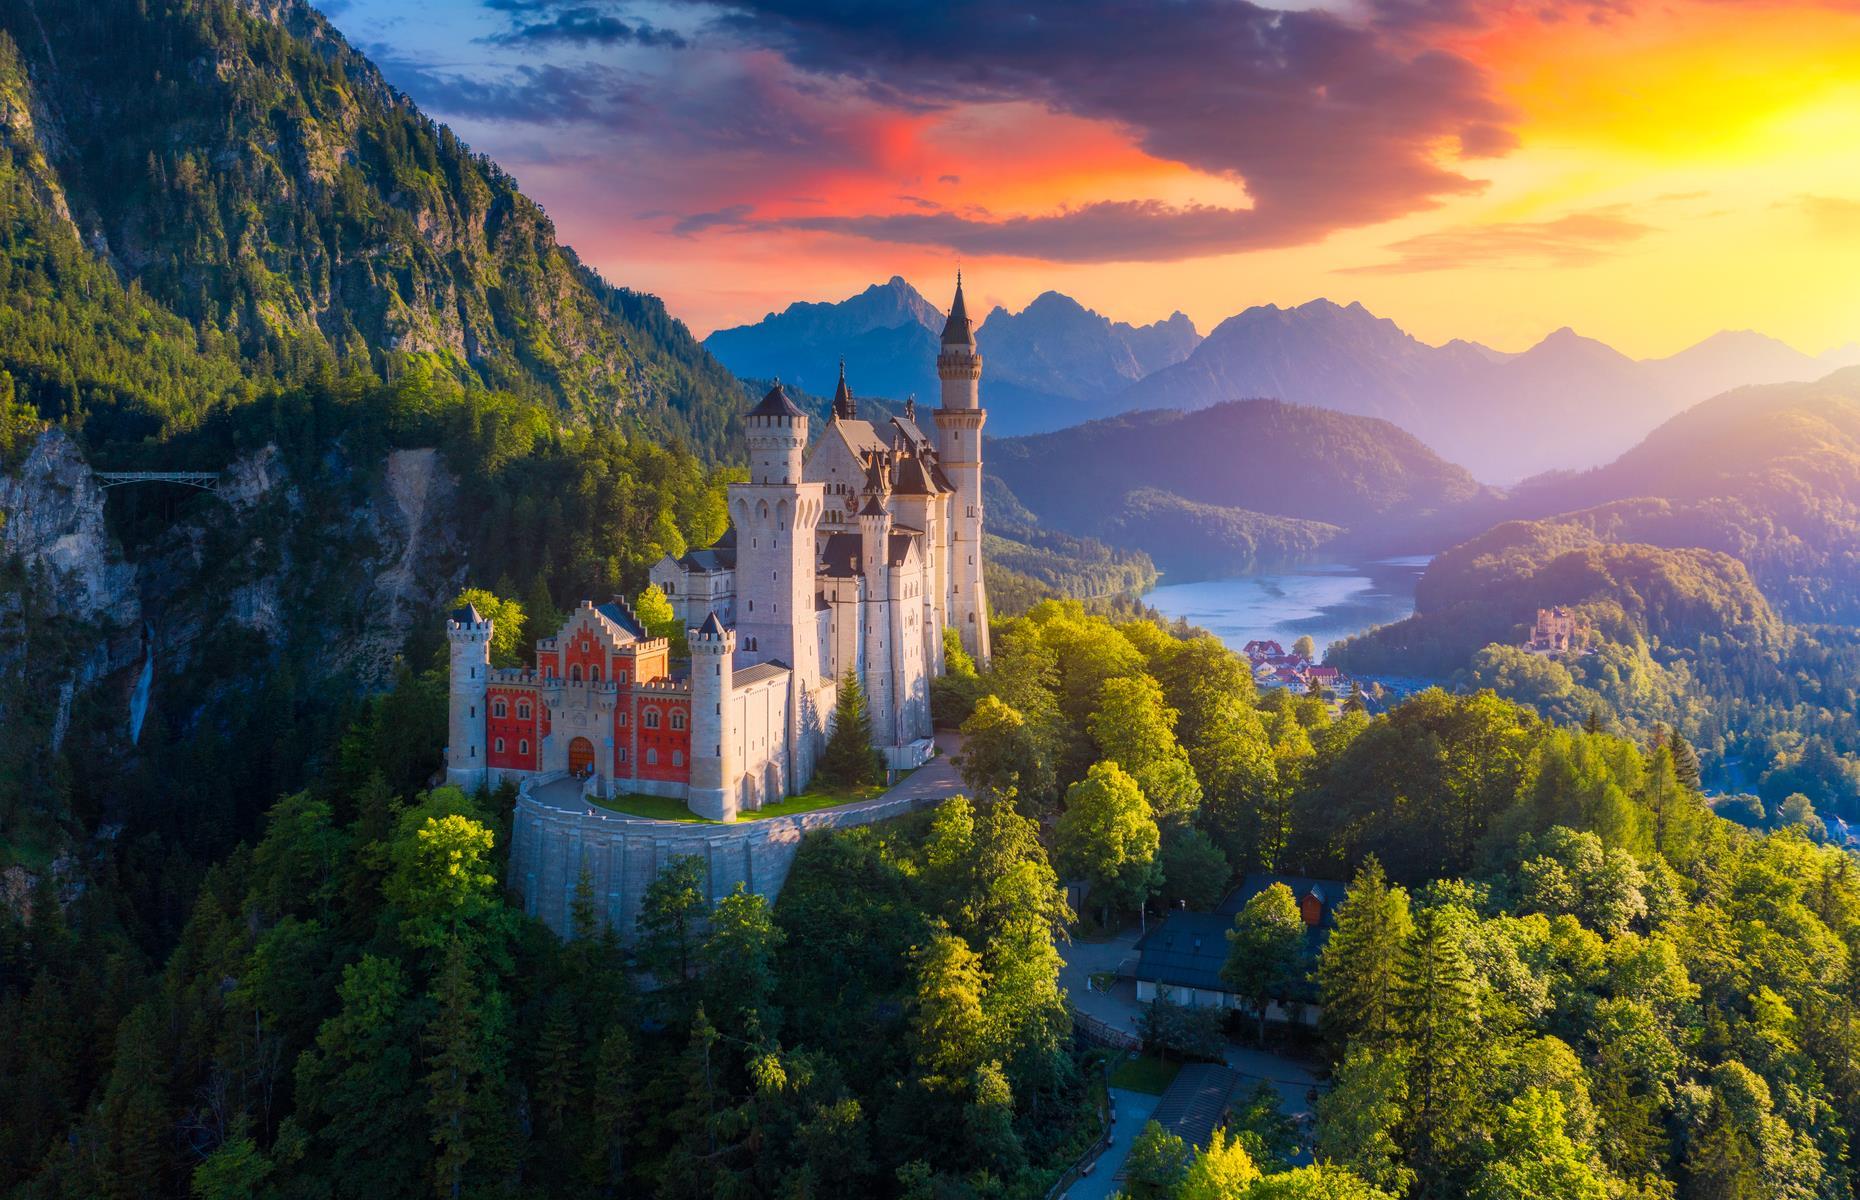 Germany’s most famous fairy-tale castle, Neuschwanstein, was built in the 19th century by King Ludwig II of Bavaria. With its imposing clifftop position, soaring cylindrical towers and blue turrets, it’s little wonder that it caught Walt Disney’s eye and imagination when he visited Bavaria with his wife. The romantic monument famously inspired his vision for Sleeping Beauty’s castle in Disneyland, later appearing in the 1959 film.